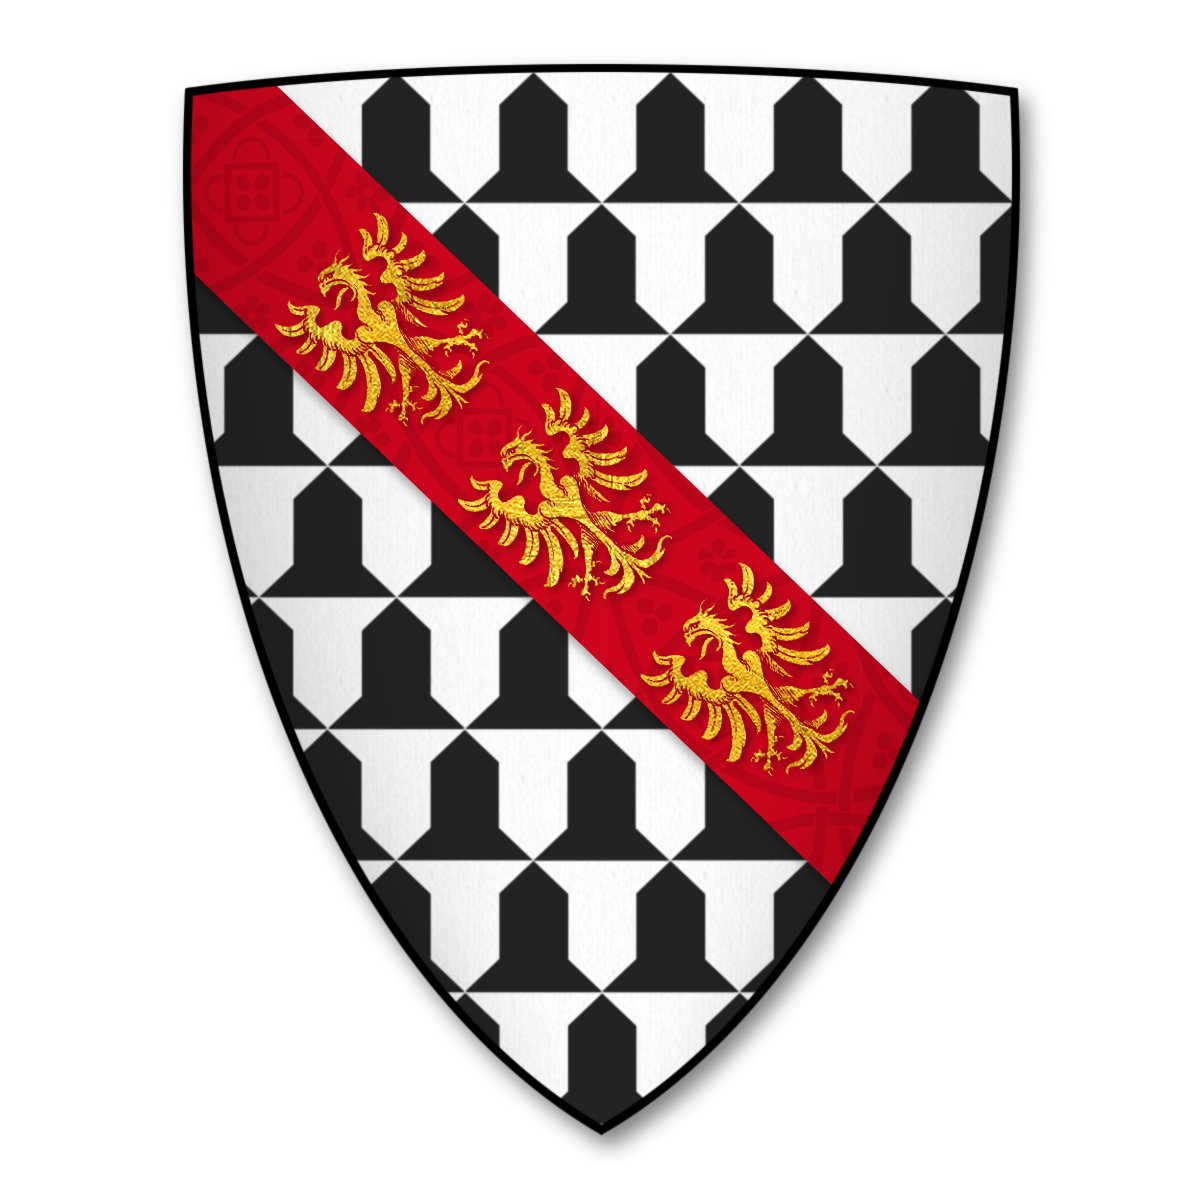 ASPILOGIA :: The Parliamentary Roll of Arms